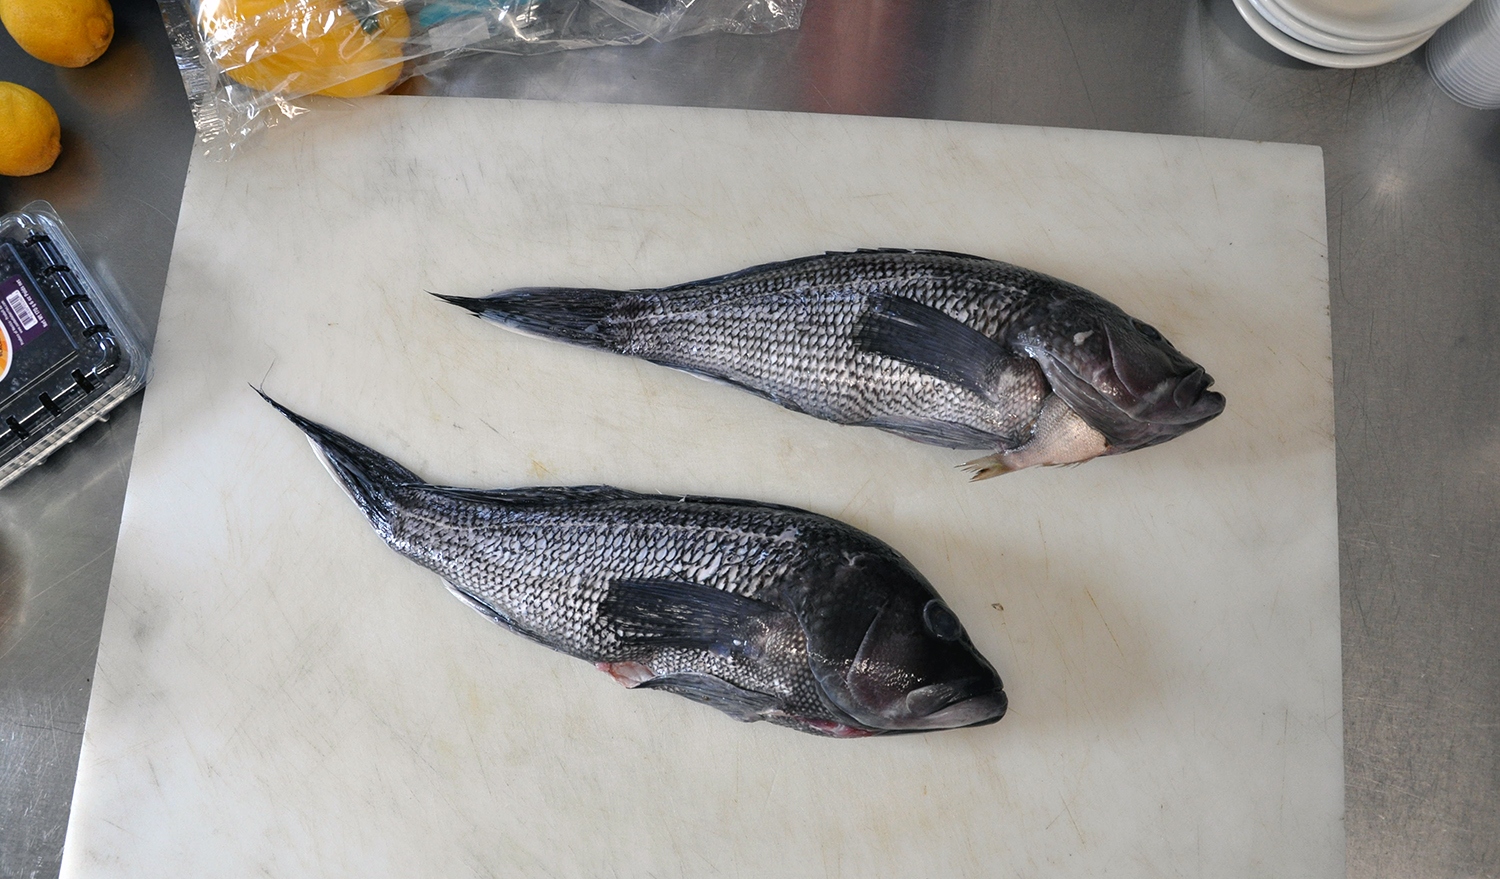 Two black sea bass ready to be prepared at Sly Fox Den Too in Charlestown.